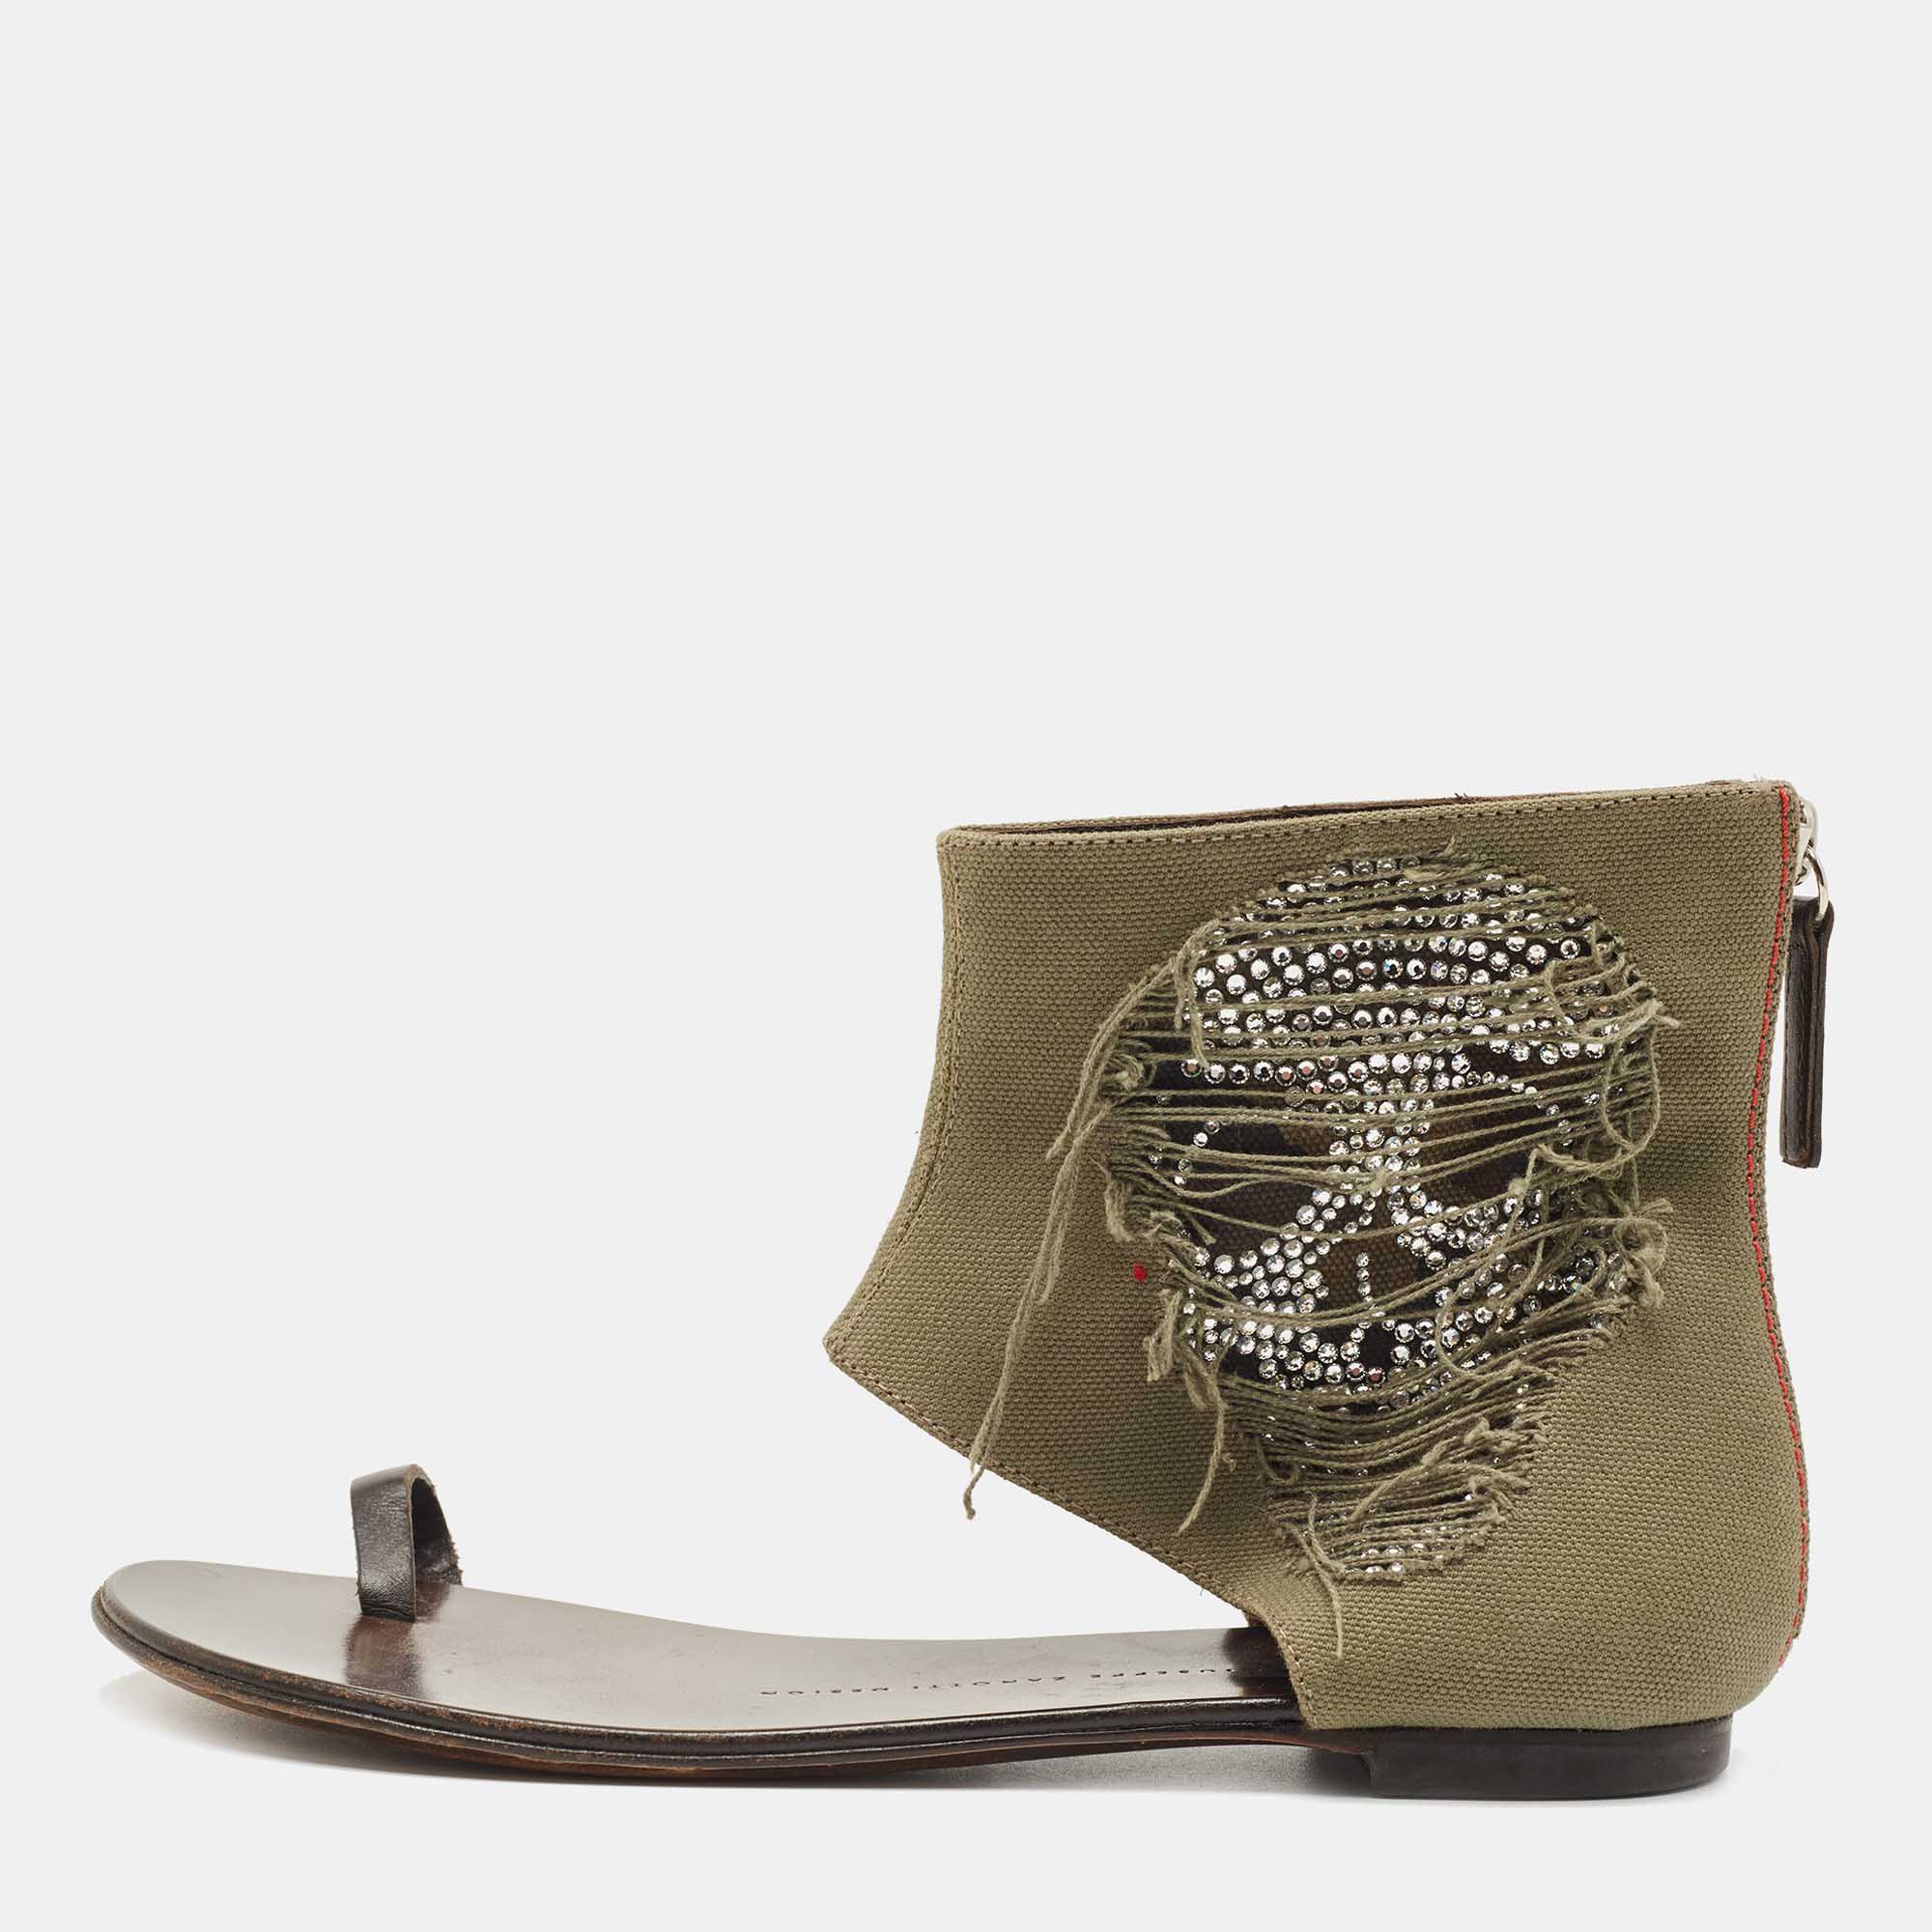 Pre-owned Giuseppe Zanotti Green Canvas Skull Crystal Embellished Toe Ring Zipper Flats Size 36